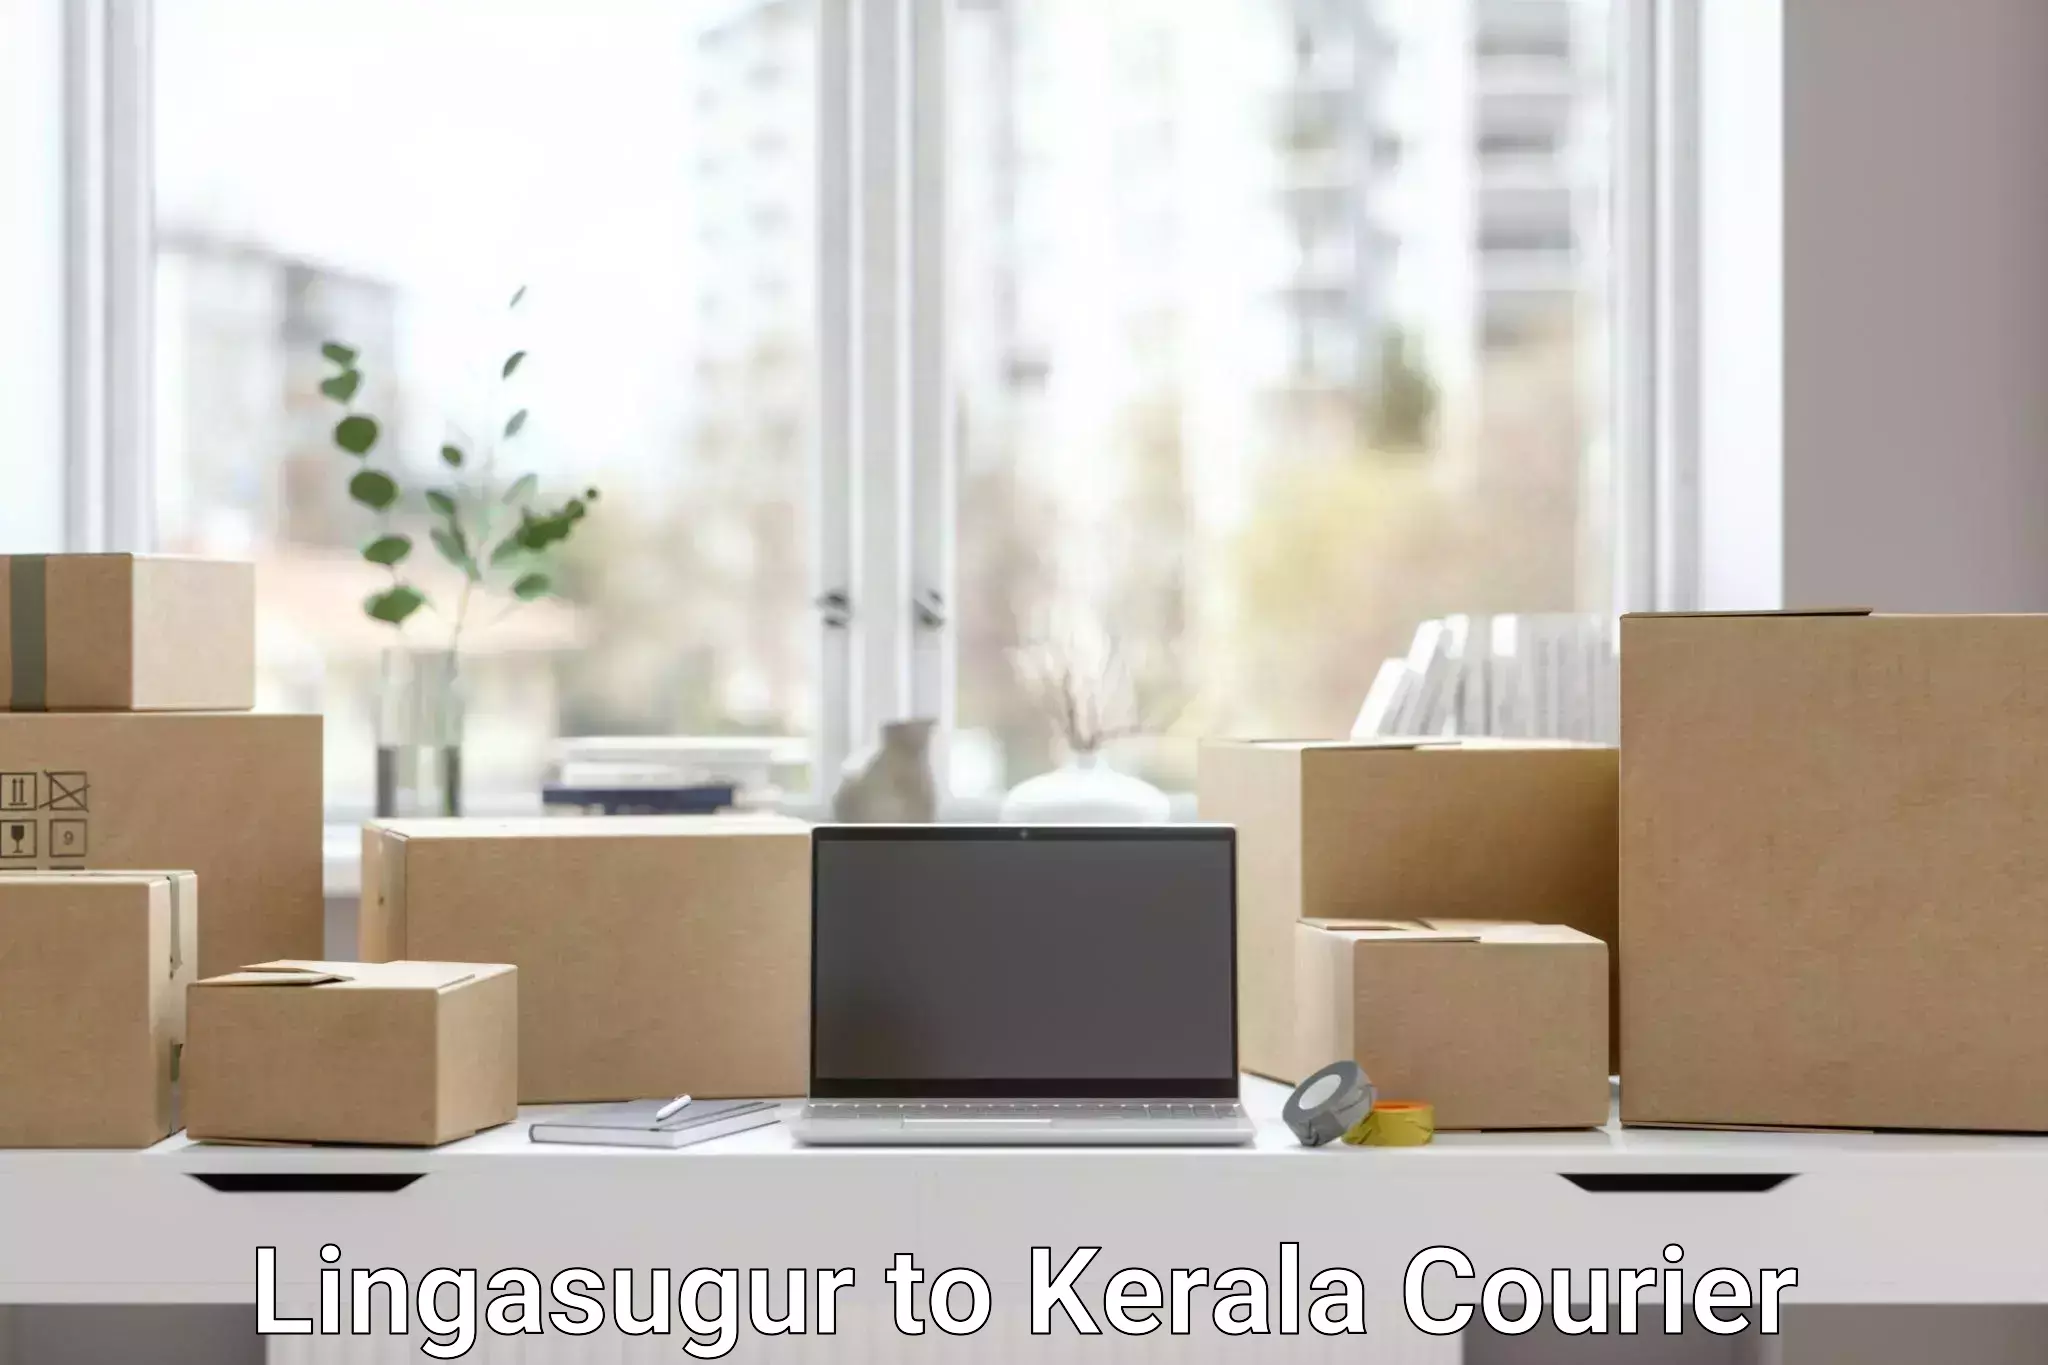 Large package courier Lingasugur to Palai